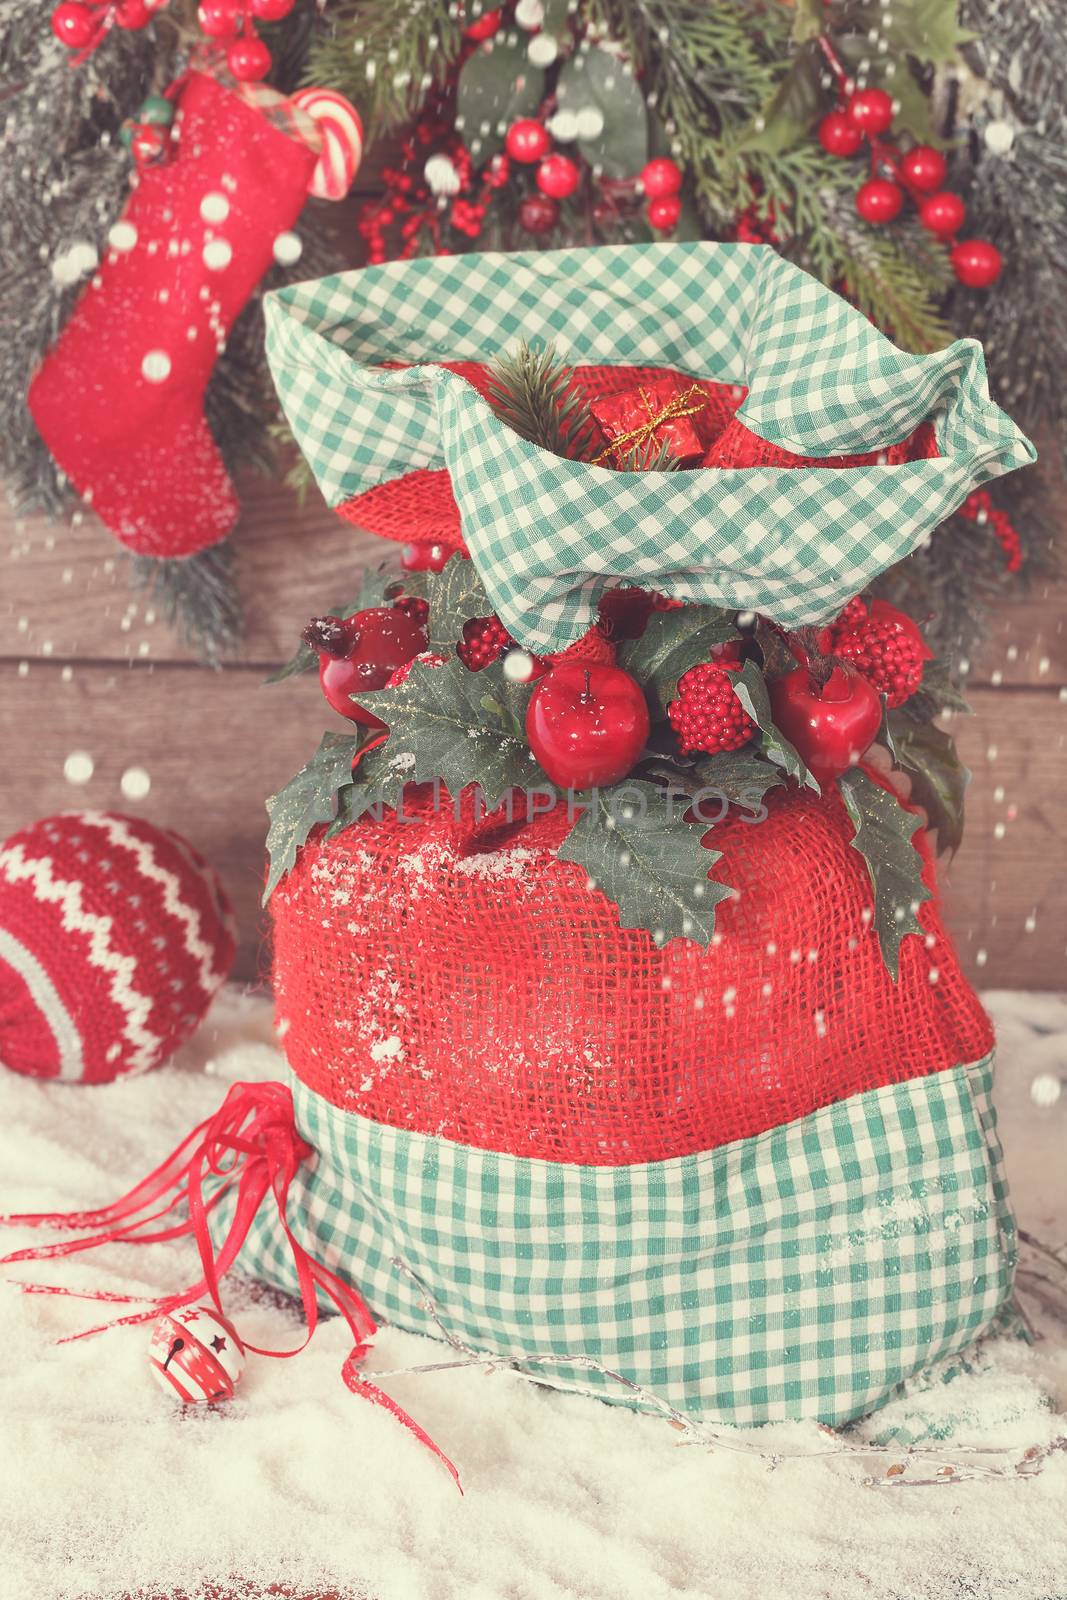 Christmas gift sack tied with ribbon, berries and holly leaves. Macro, selective focus Done with vintage retro filter